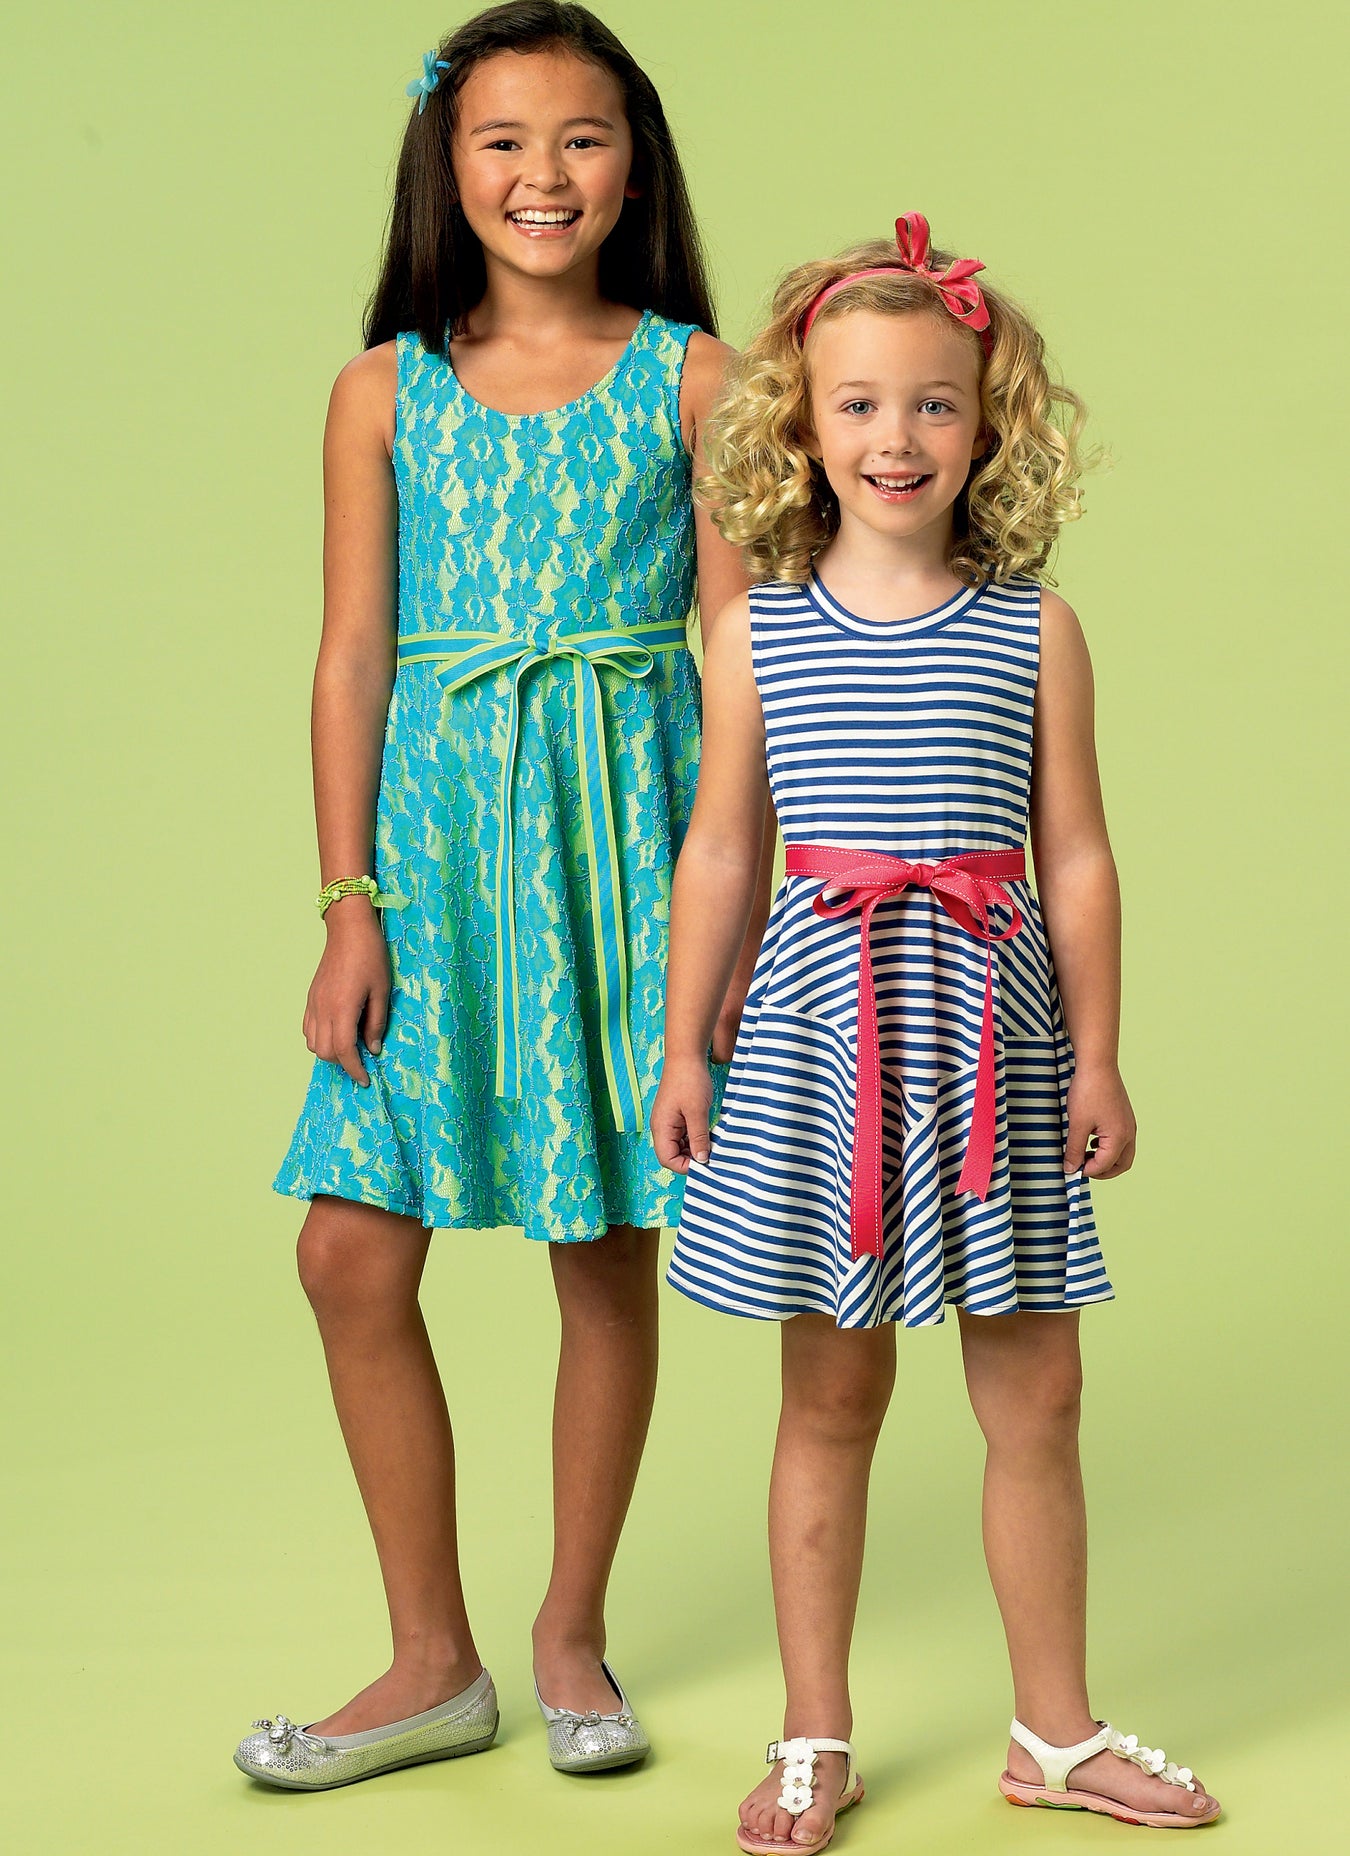 All your sewing patterns for children's wear at Jaycotts